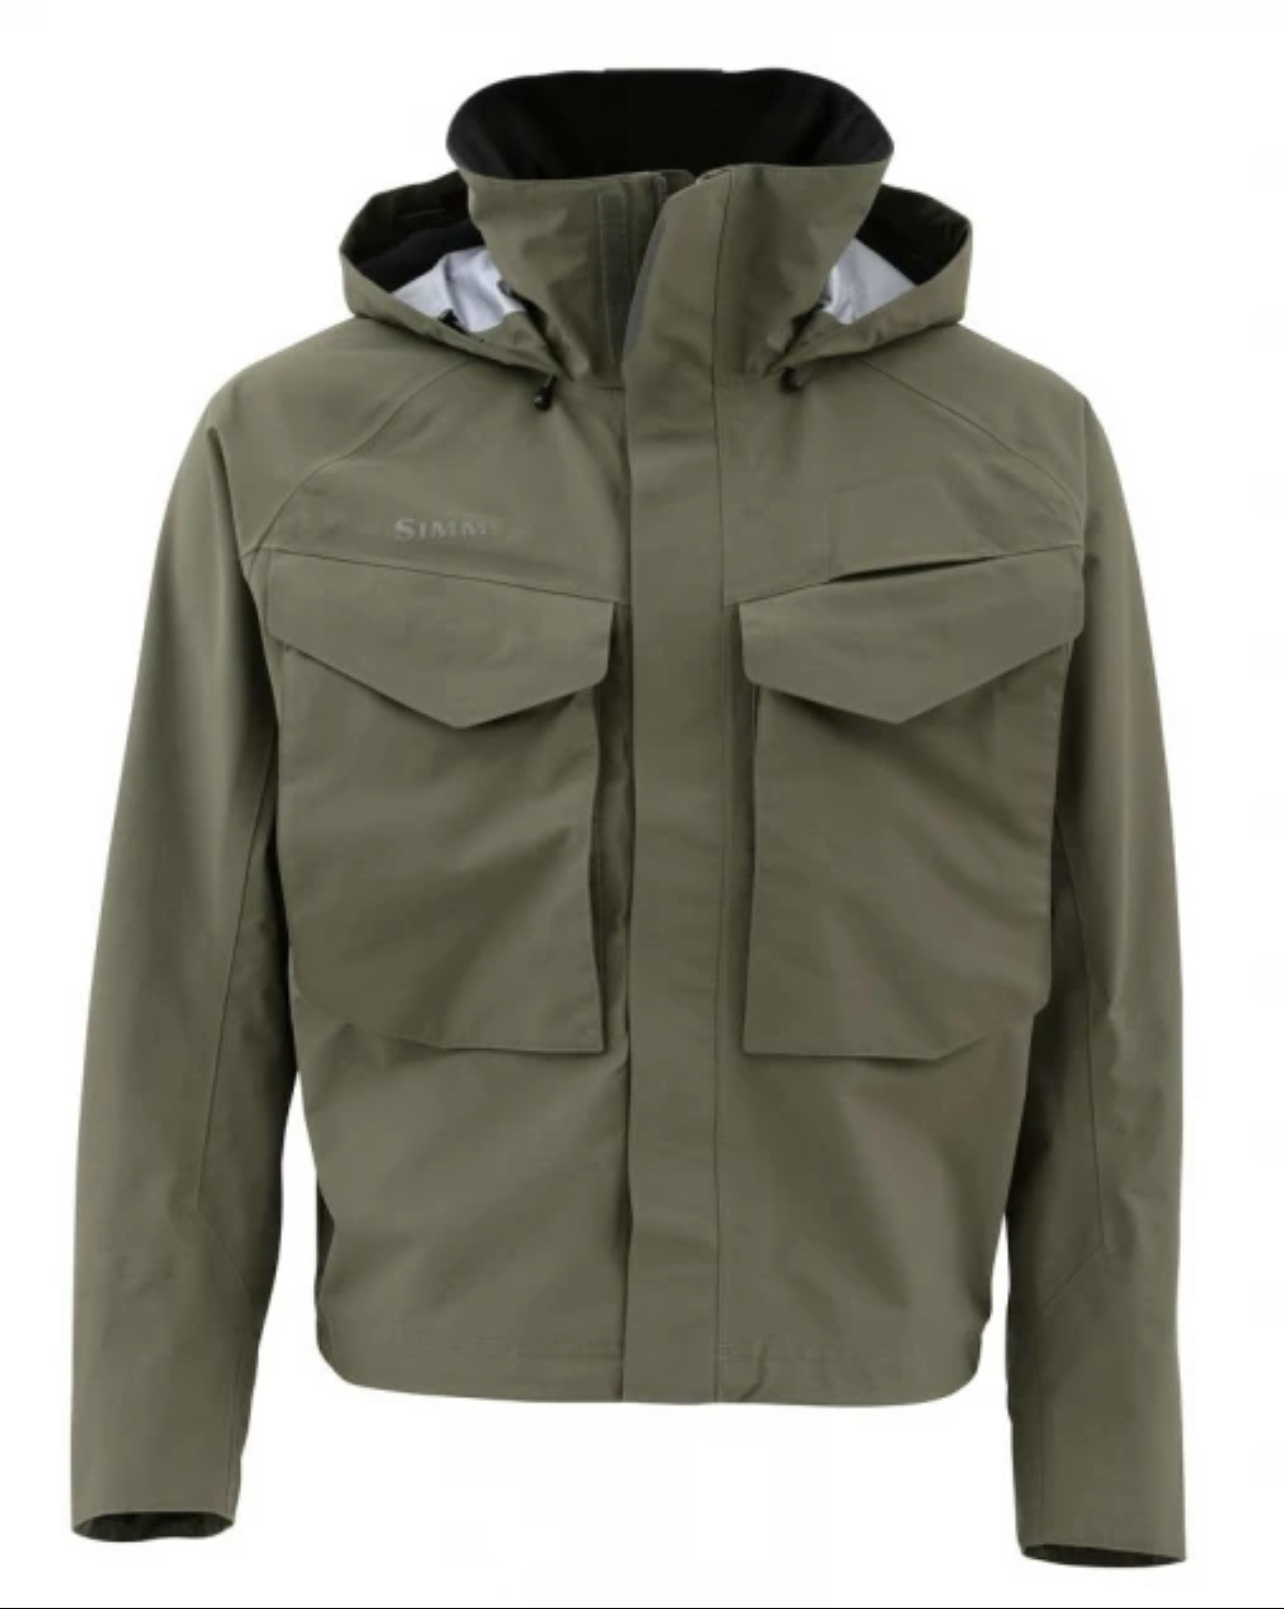 Simms M's Guide Wading Jacket (OLDER) - Loden - 3XL